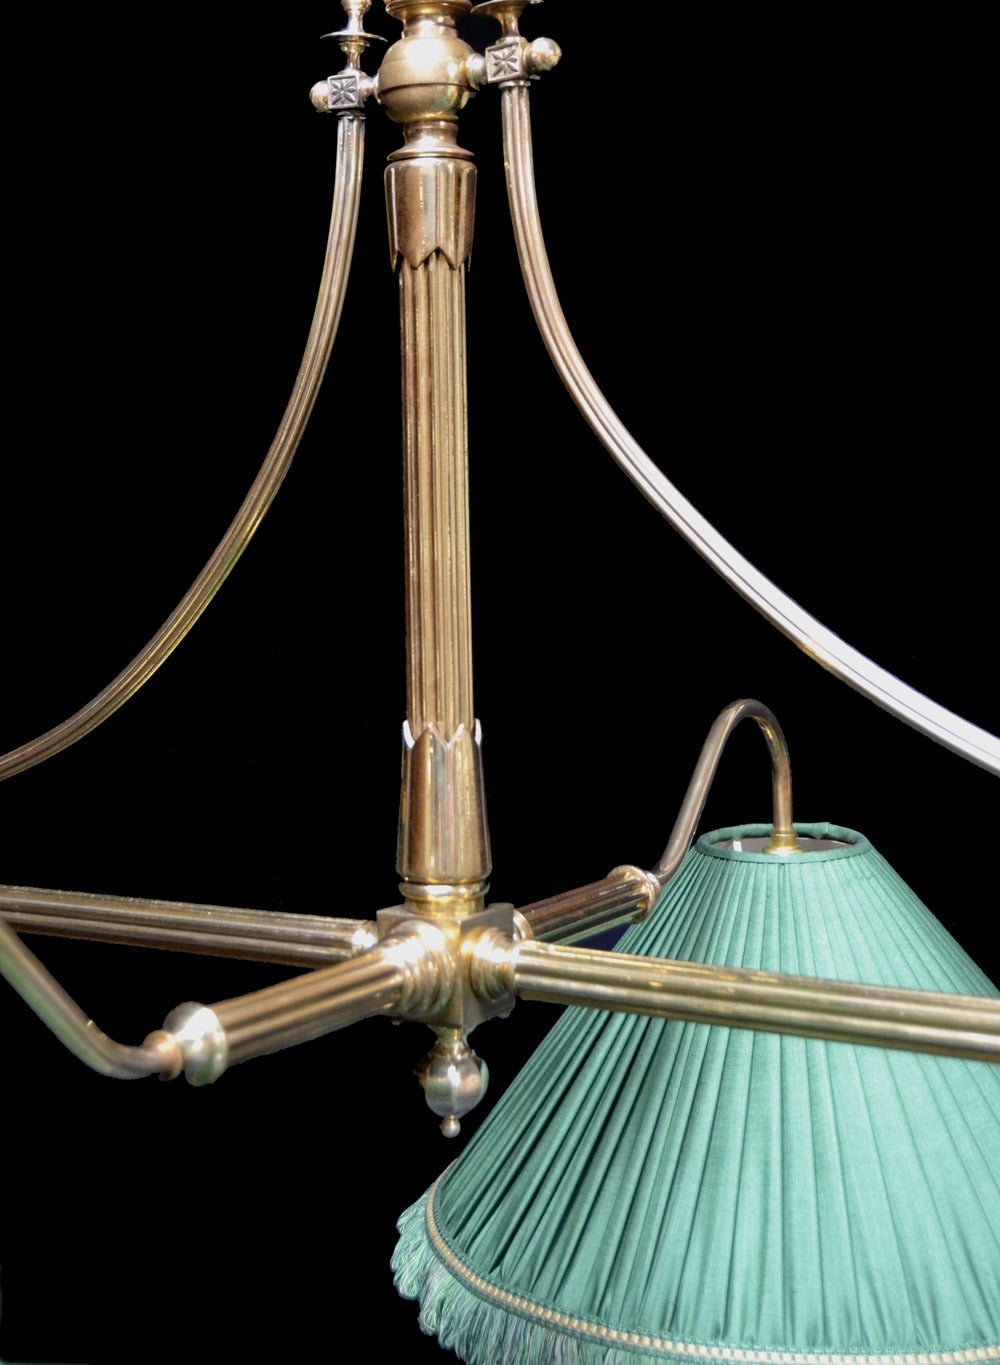 A brass framed Antique Billiard or Snooker table light with restrained decoration, the curved arms support six silk shades,the central column with applied coronet moldings and decorative finials, flanked by two reeded support braces each fitted with